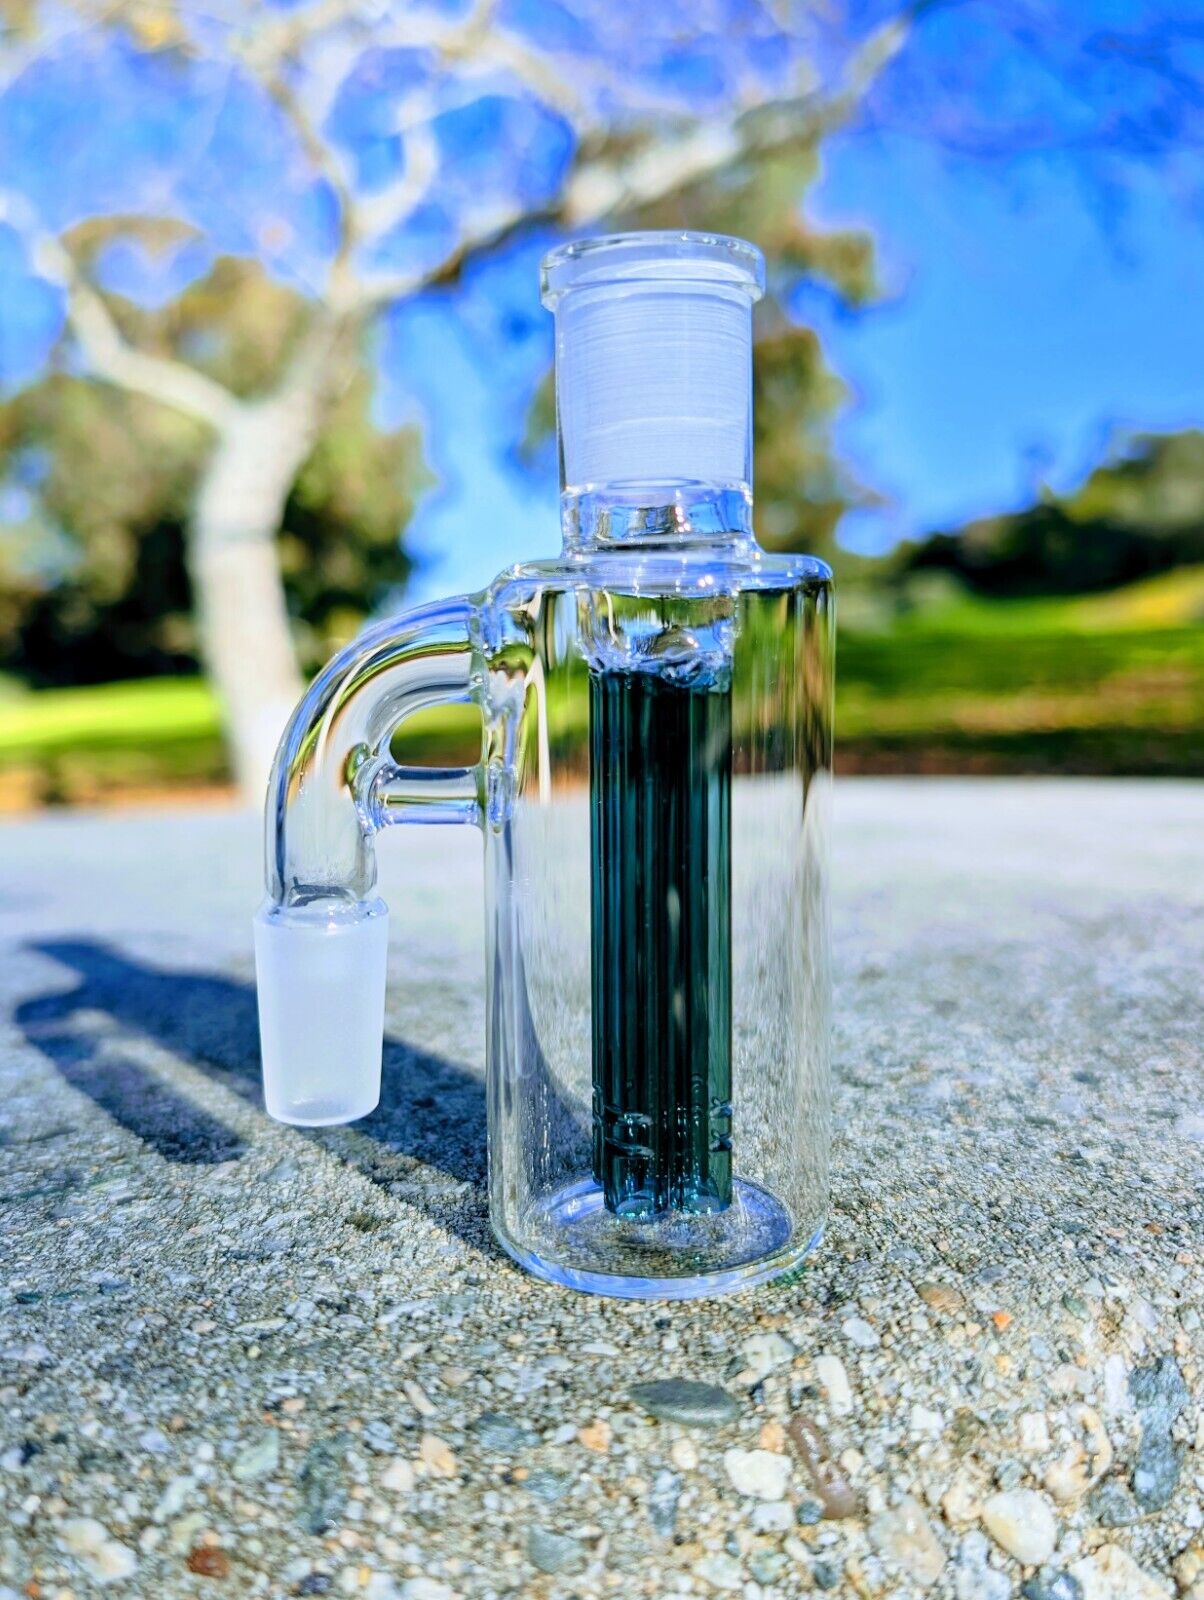 Premium Thick 14mm 90° Teal Quad Tree Perc Ash Catcher Tobacco Water Pipe Bong